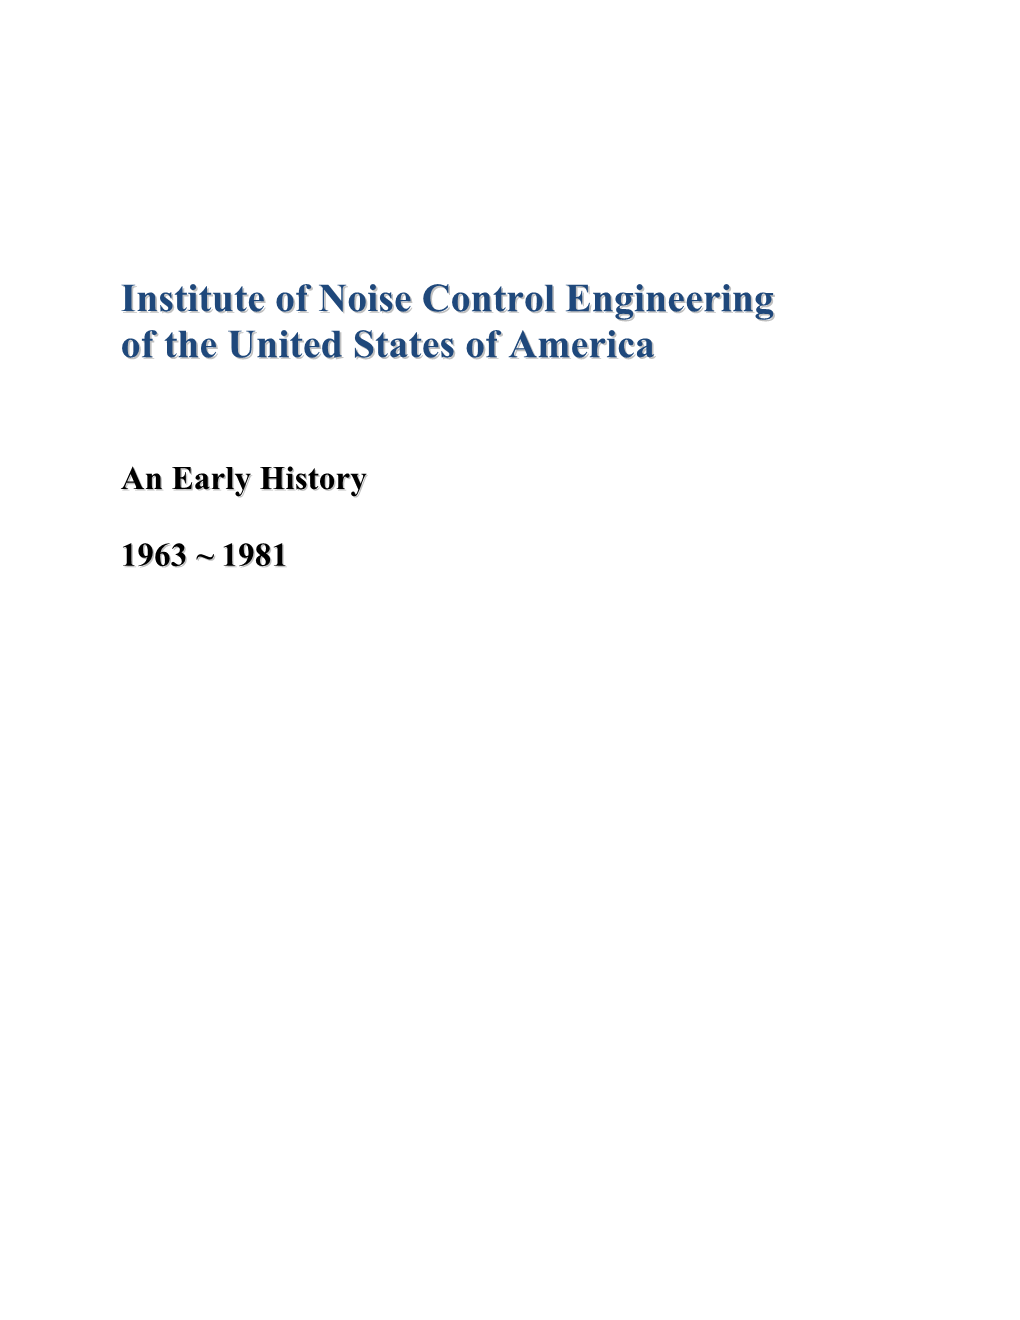 Institute of Noise Control Engineering of the United States of America